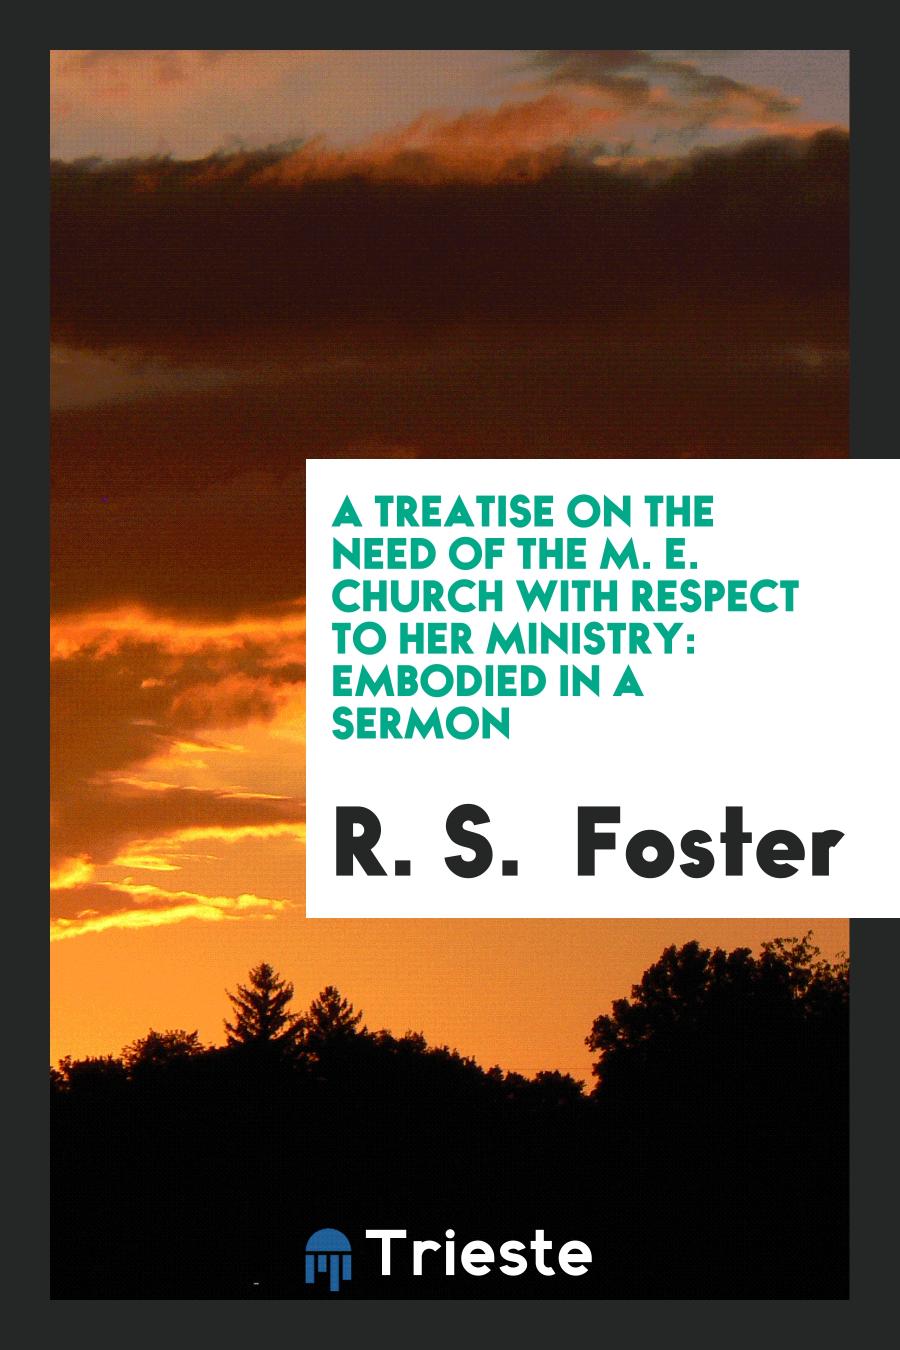 A Treatise on the Need of the M. E. Church with Respect to Her Ministry: Embodied in a Sermon